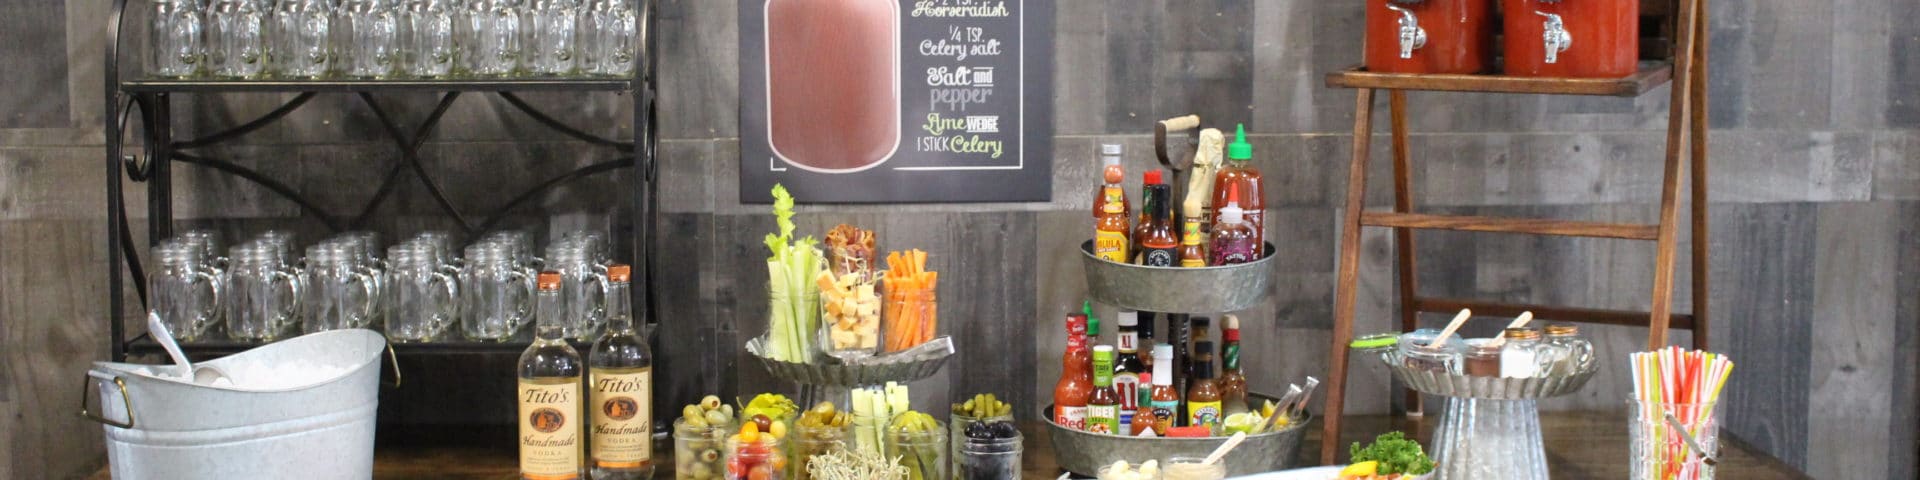 Bloody Mary bar by Normandy Catering